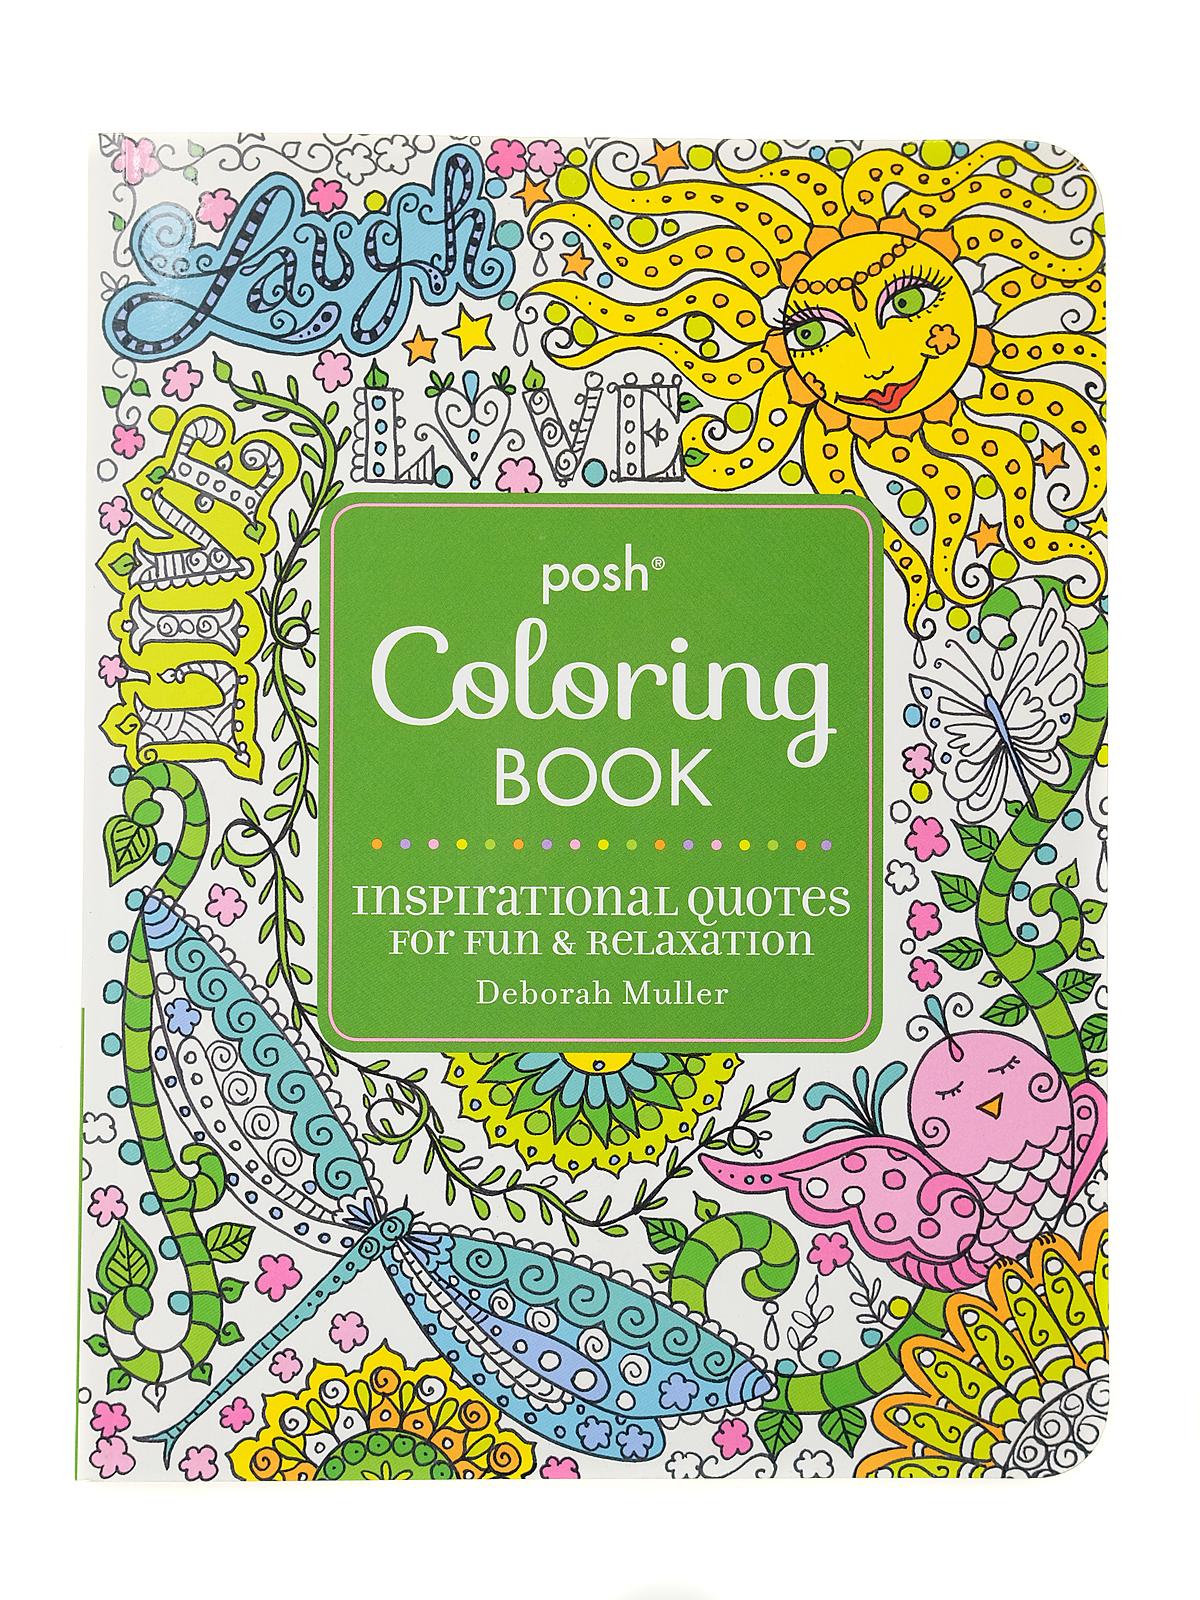 Posh Coloring Books Inspirational Quotes